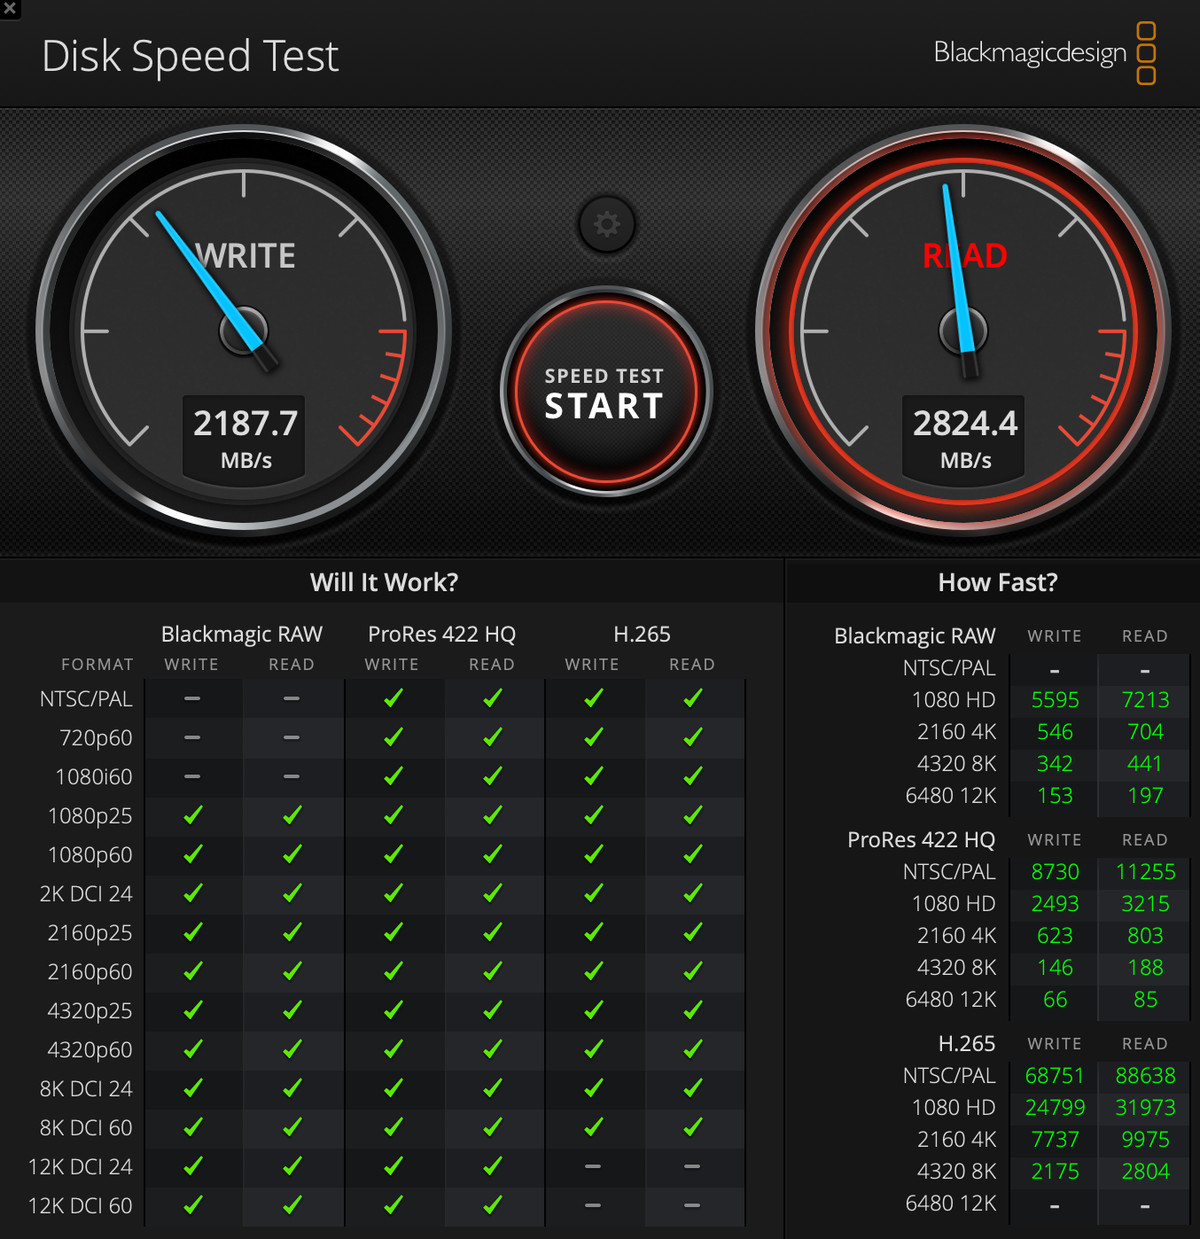 A screenshot of Blackmagic Disk Speed Test indicating scores of 2187.7 for Write and 2824.4 for Read.